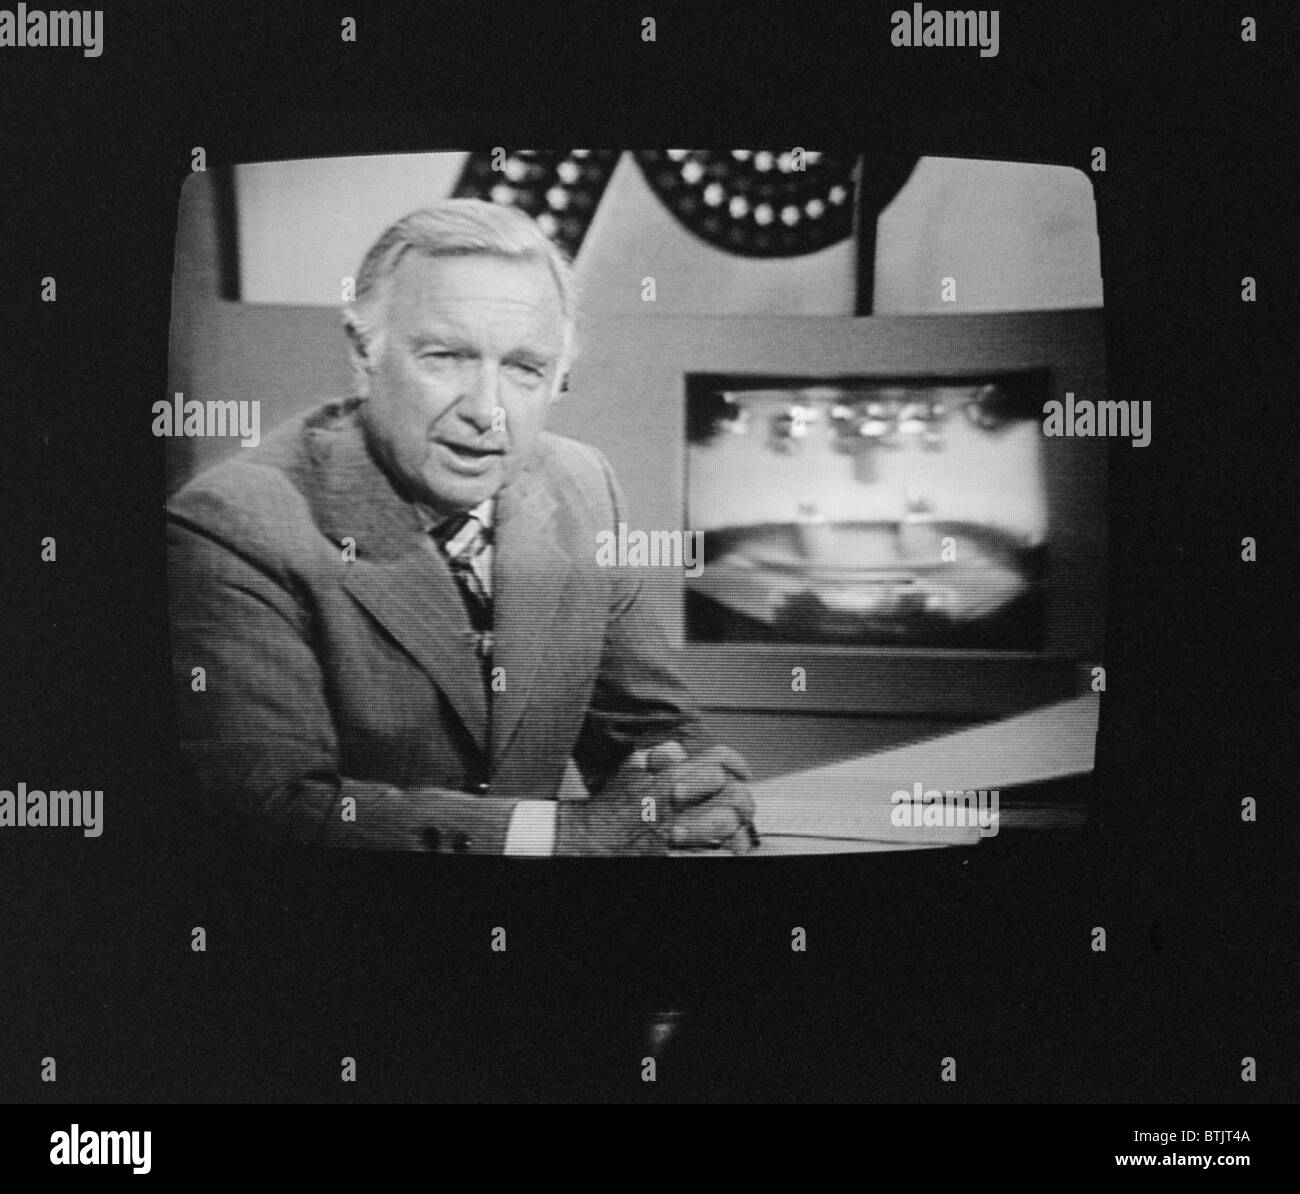 Walter Cronkite, American Journalist, on television during the 1st presidential debate between Gerald Ford and Jimmy Carter, in Stock Photo